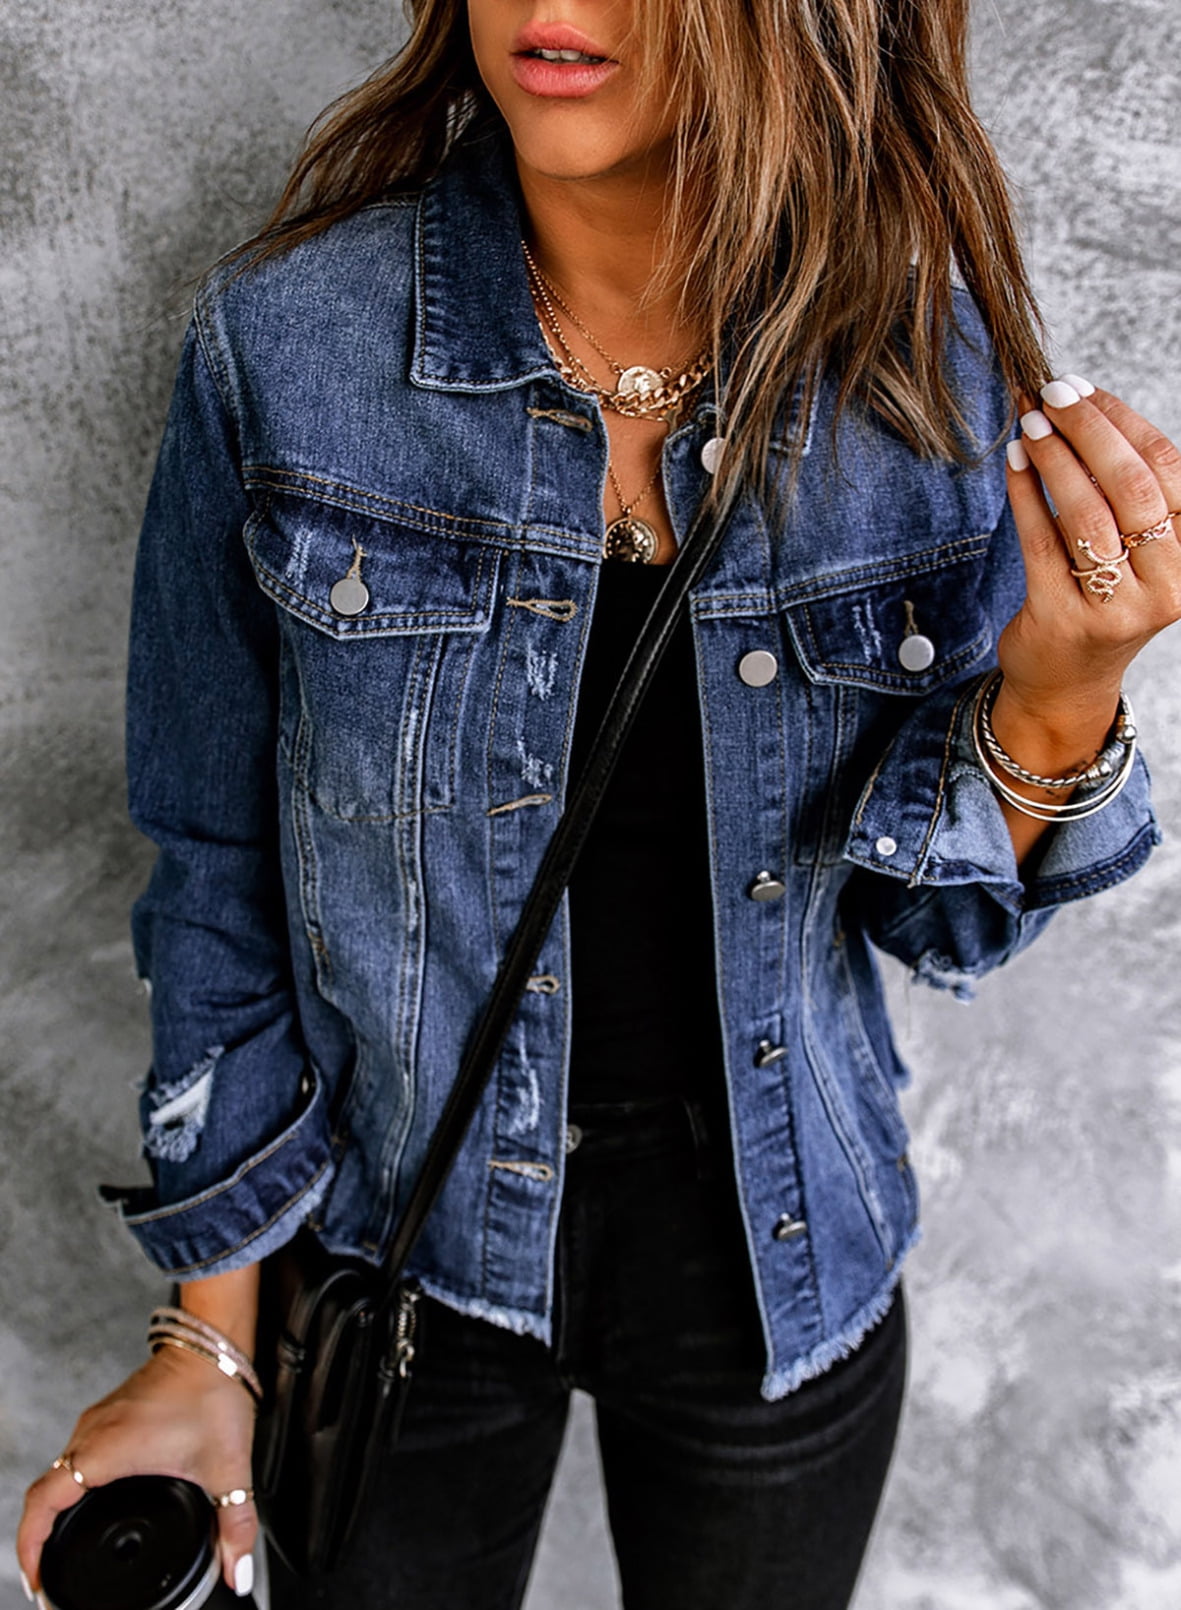 What To Wear With a Denim Jacket